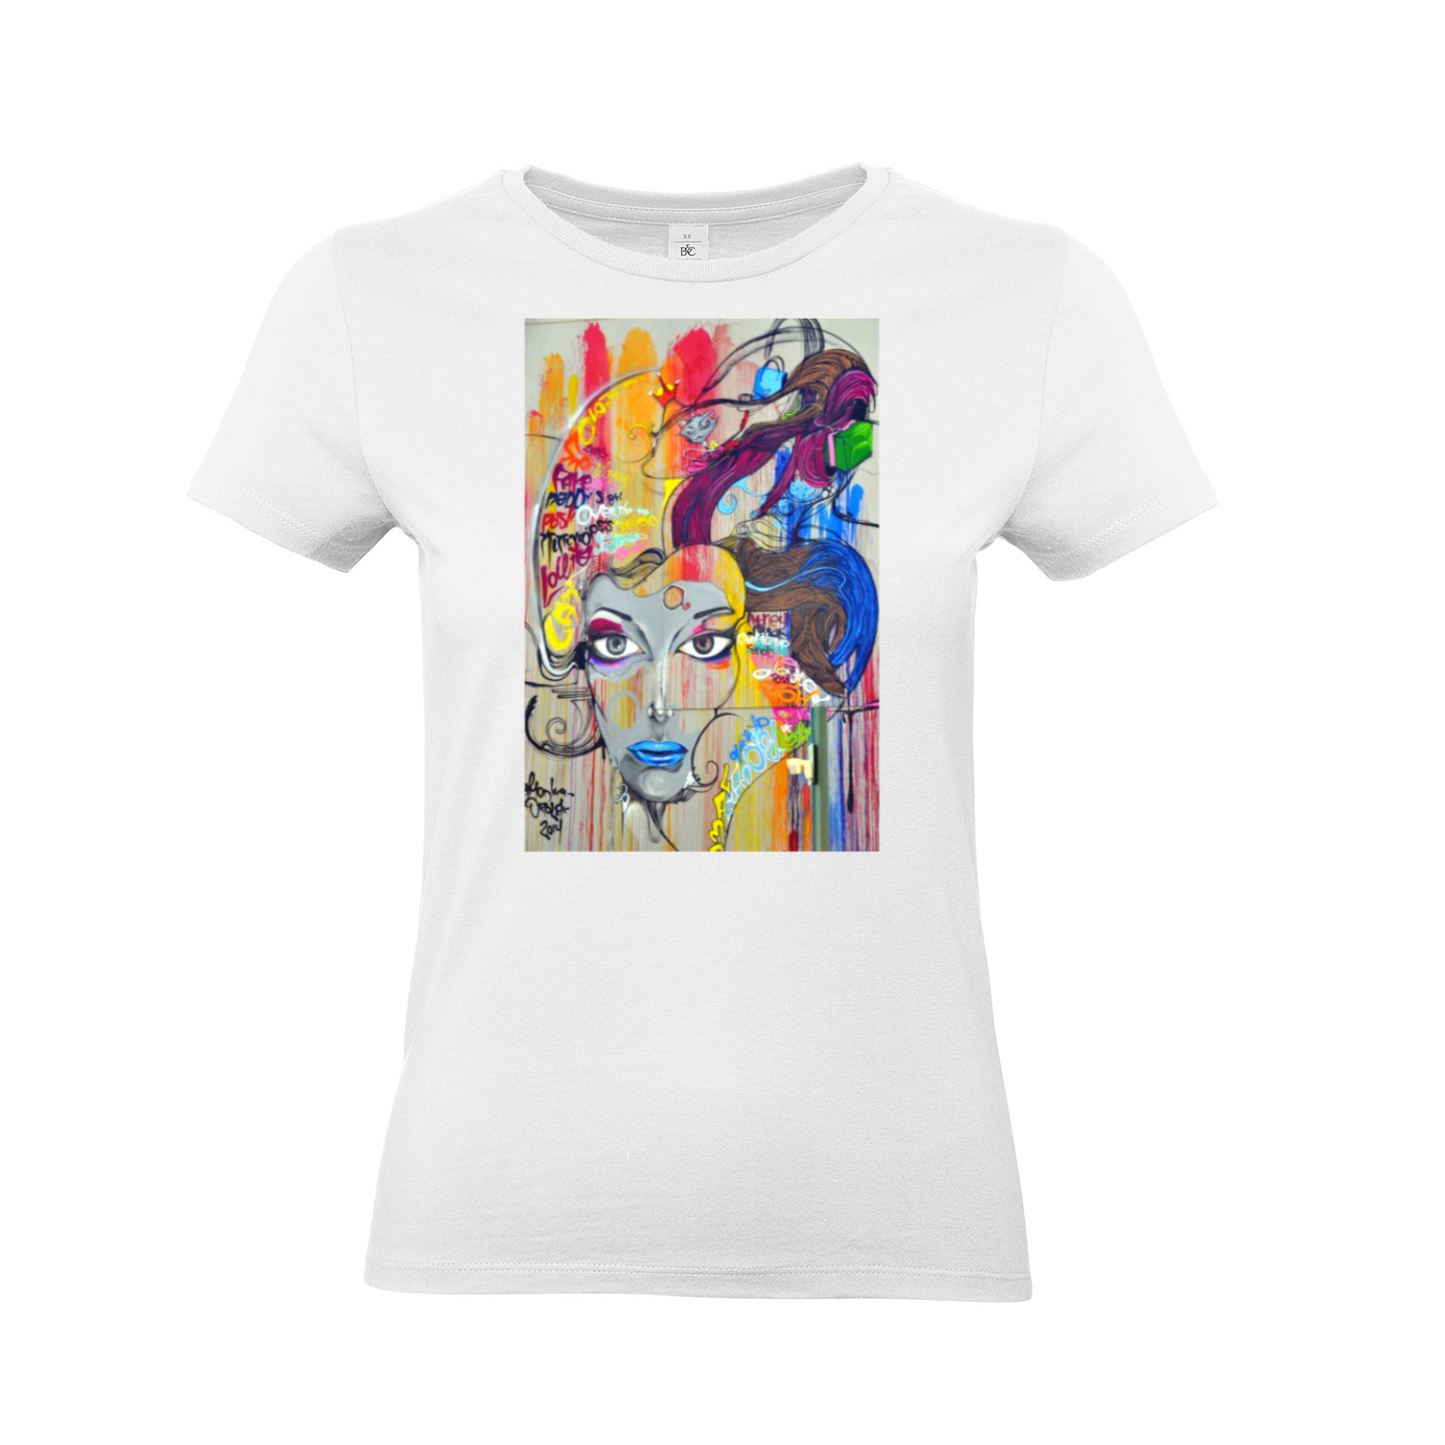 T-Shirt "Painted Woman"